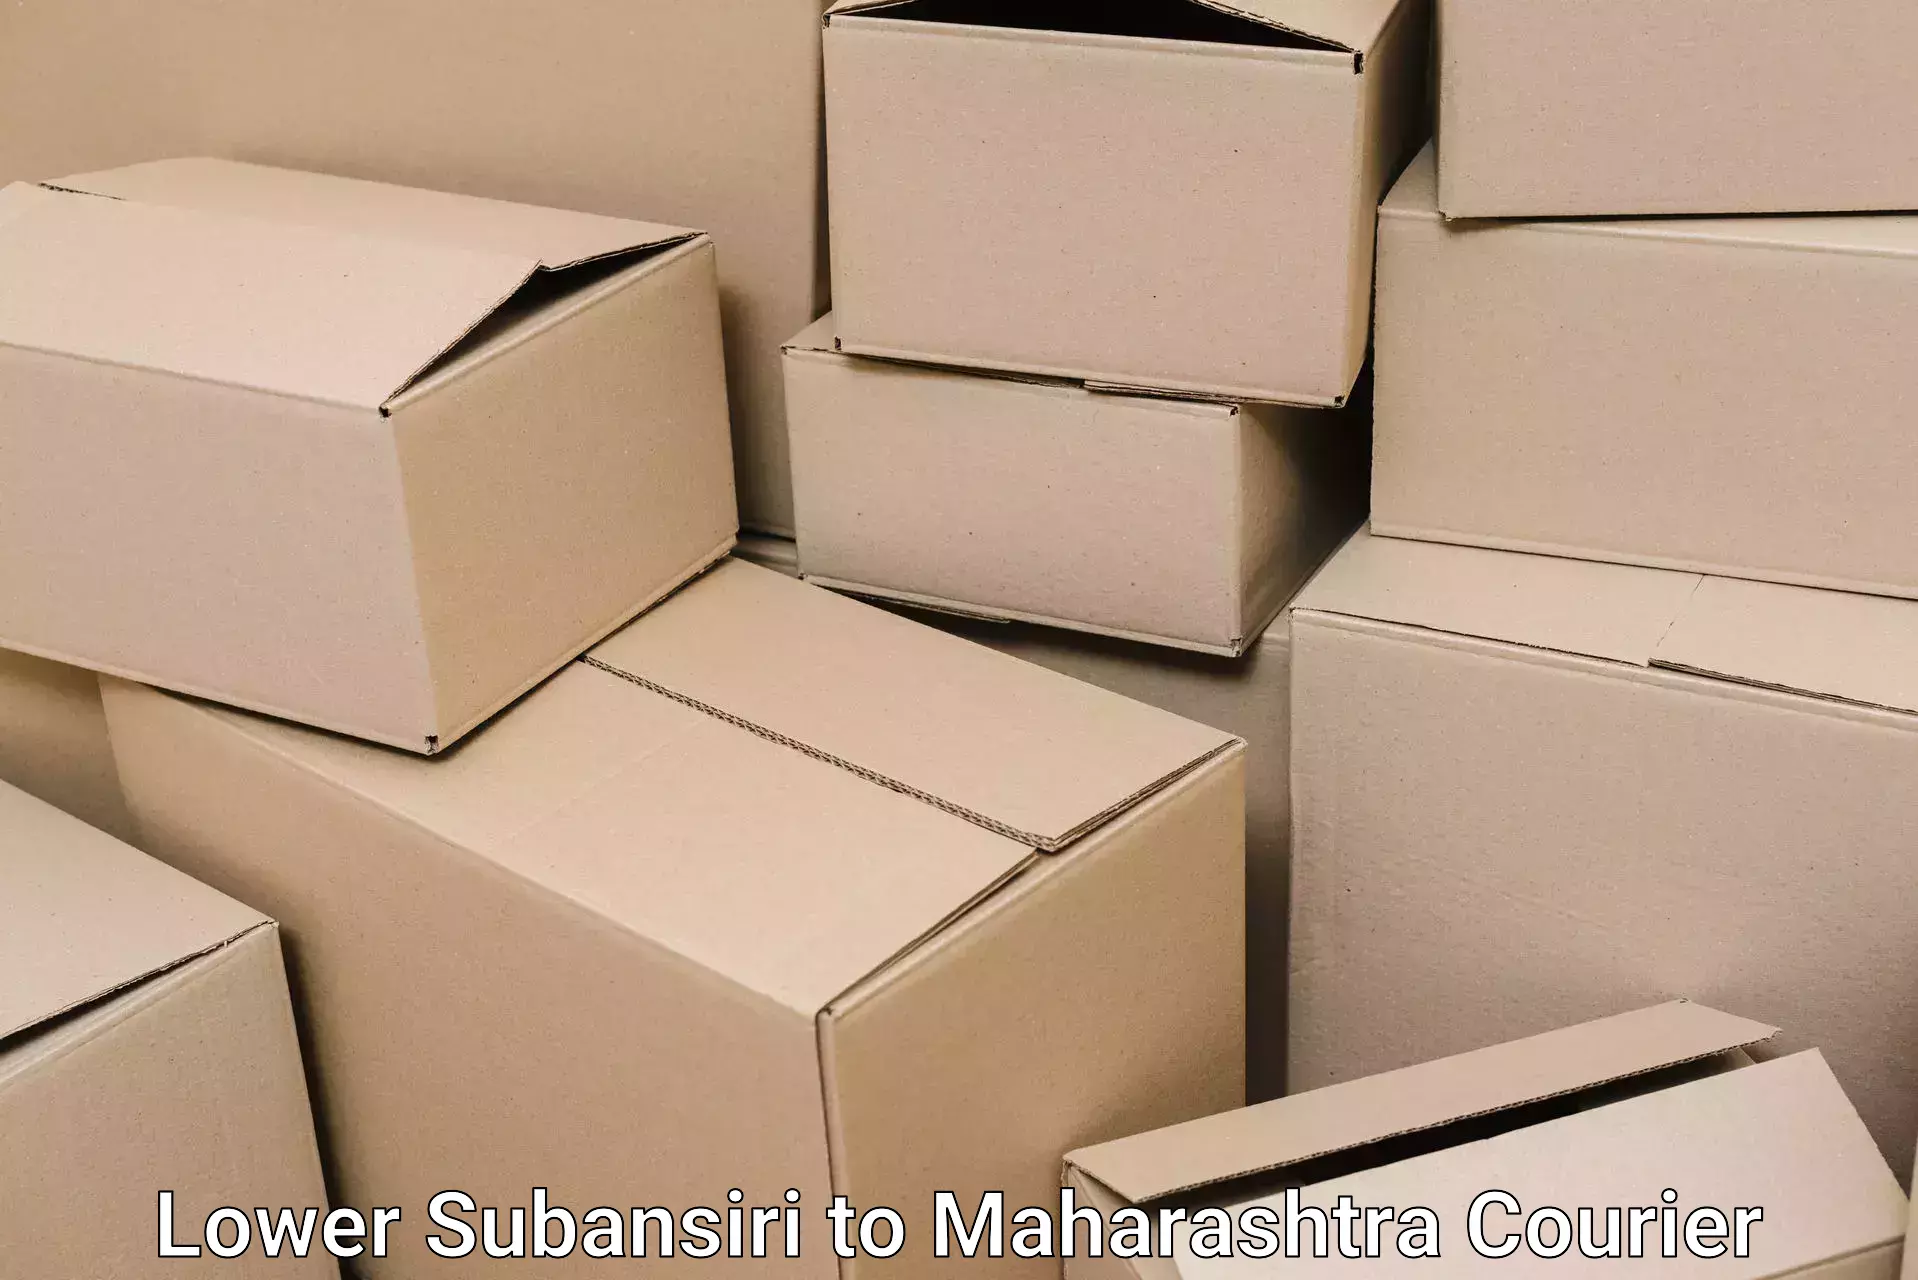 Furniture delivery service Lower Subansiri to Ulhasnagar